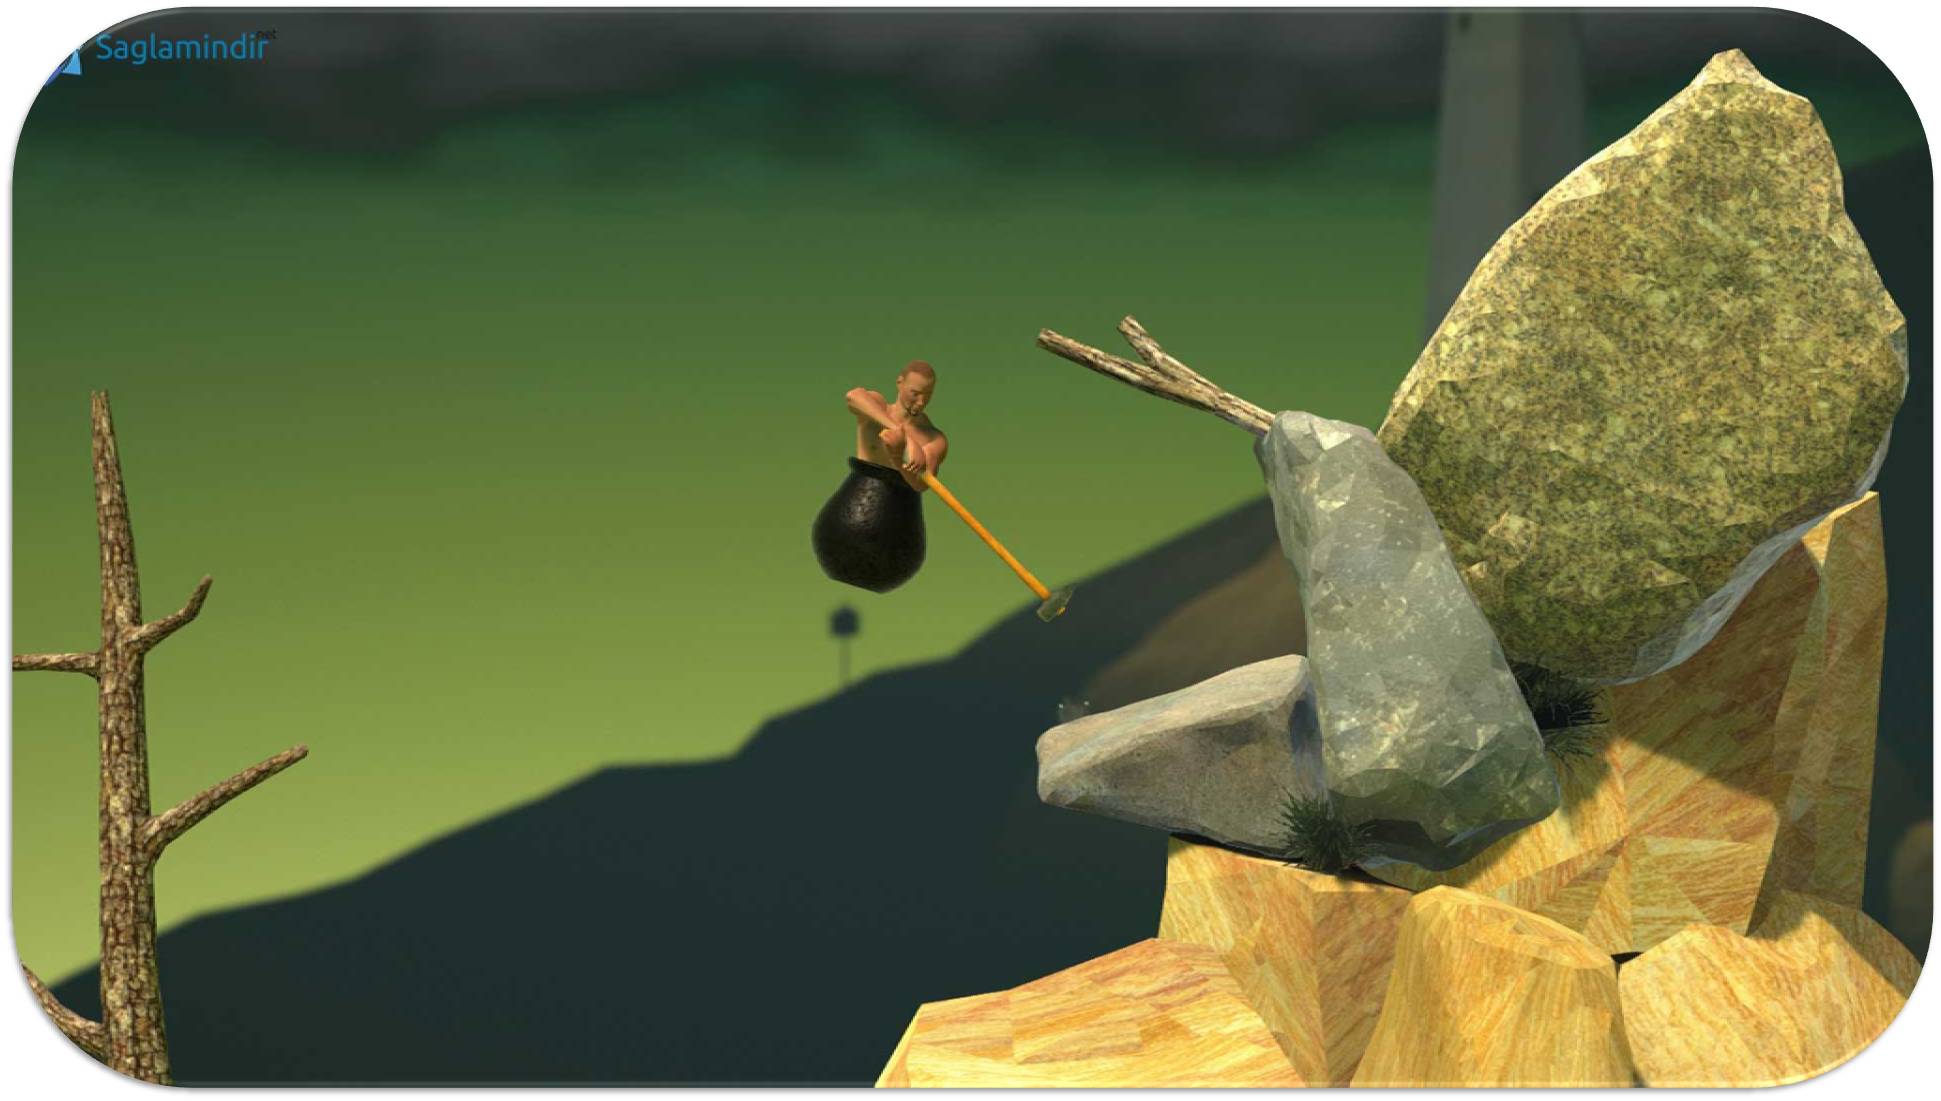 Getting Over It with Bennett Foddy full indir